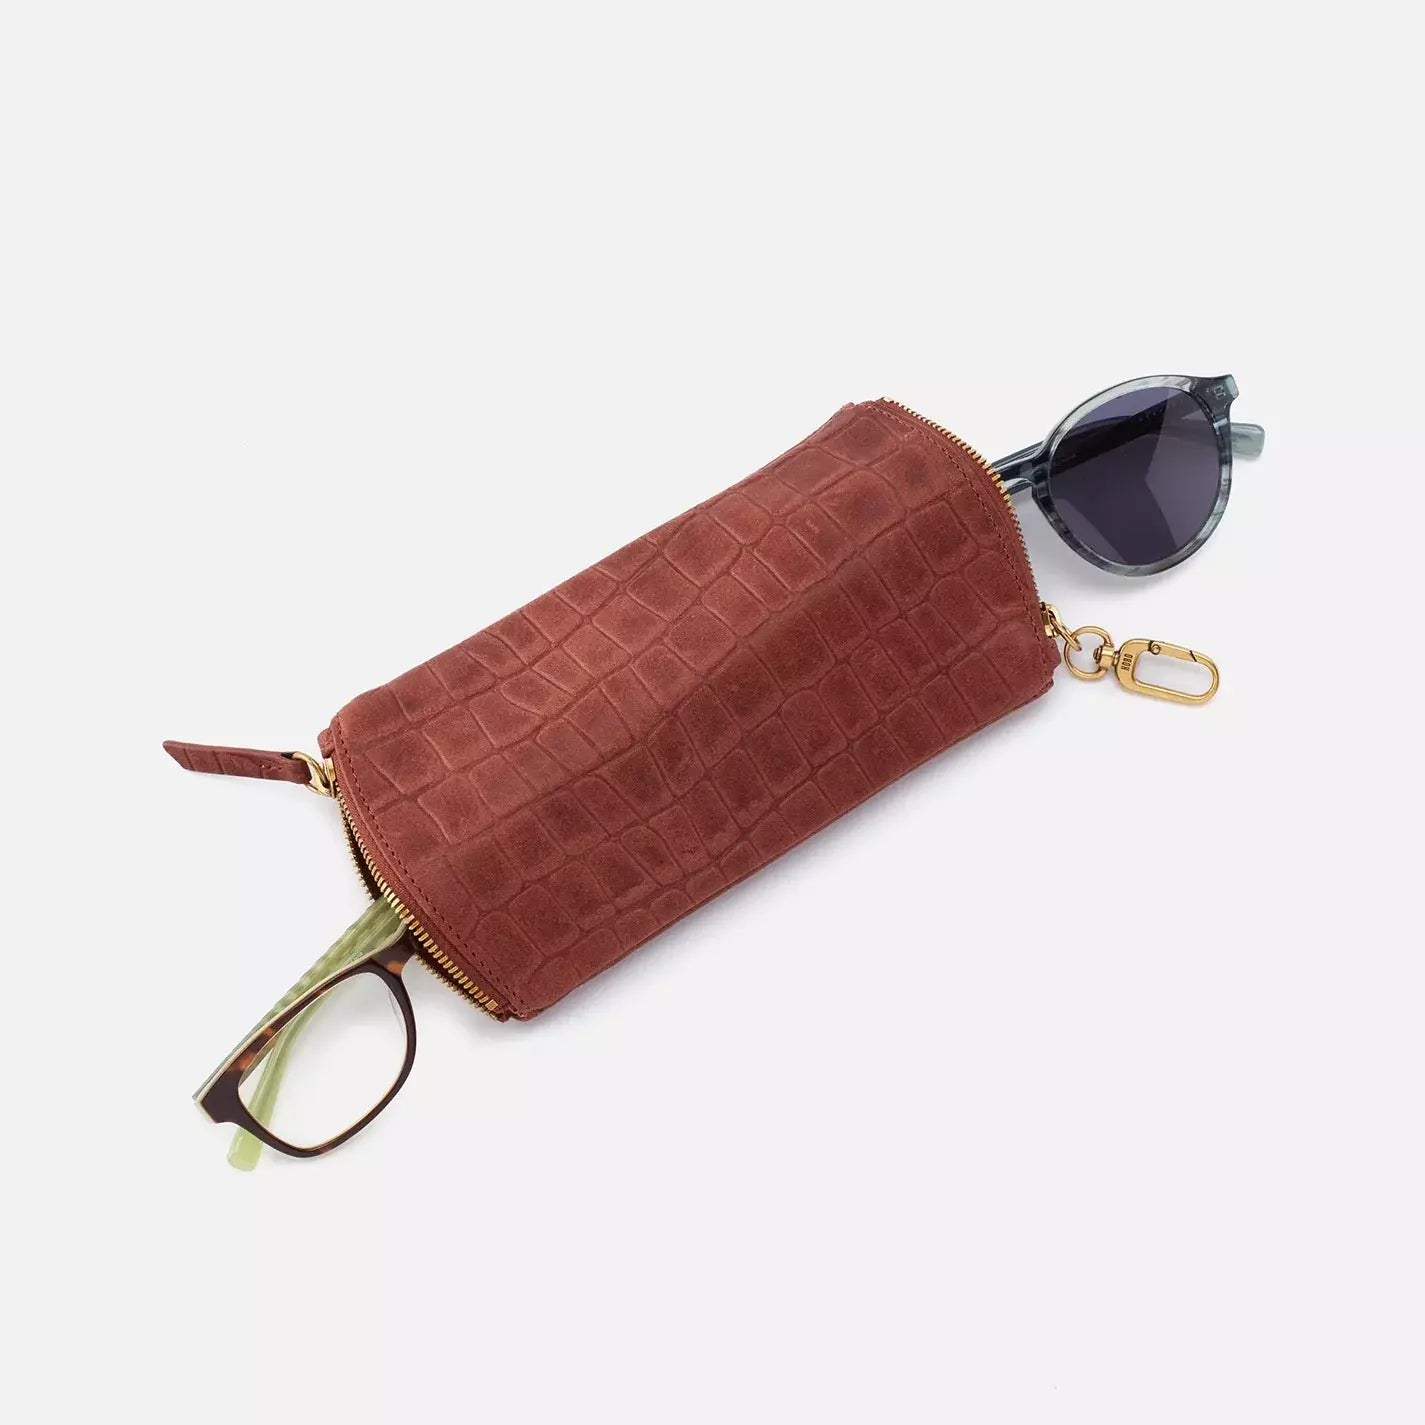 The Spark in brandy brown is a double eyeglass case that has an easy-to-use clip for attaching to your bag and two compartments for your favorite glasses. Shop for it at the Painted Cottage in Edgewater, MD